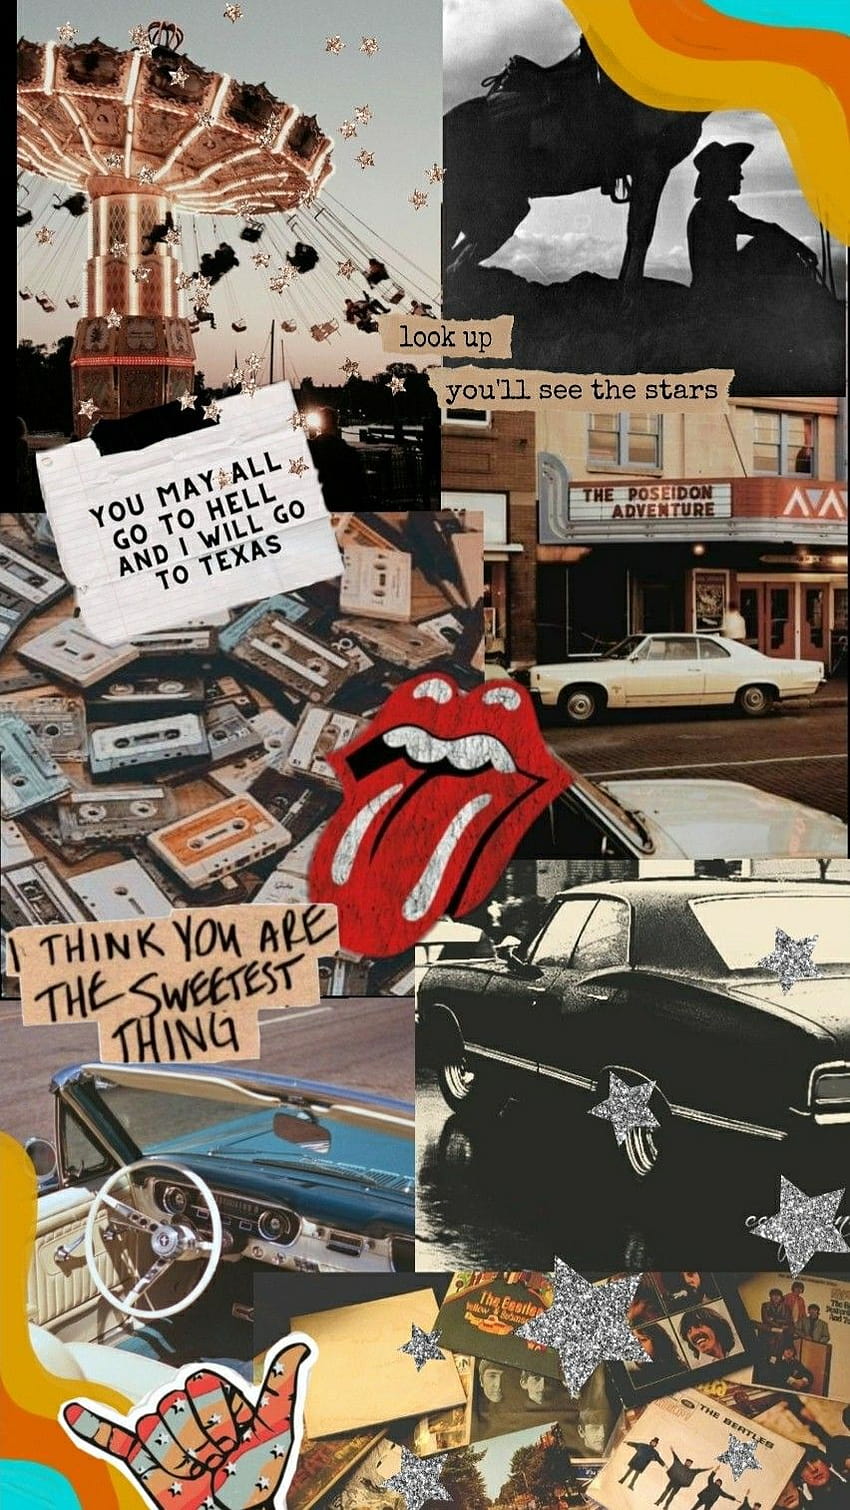 The rolling stones poster is a collage of pictures - Texas, western